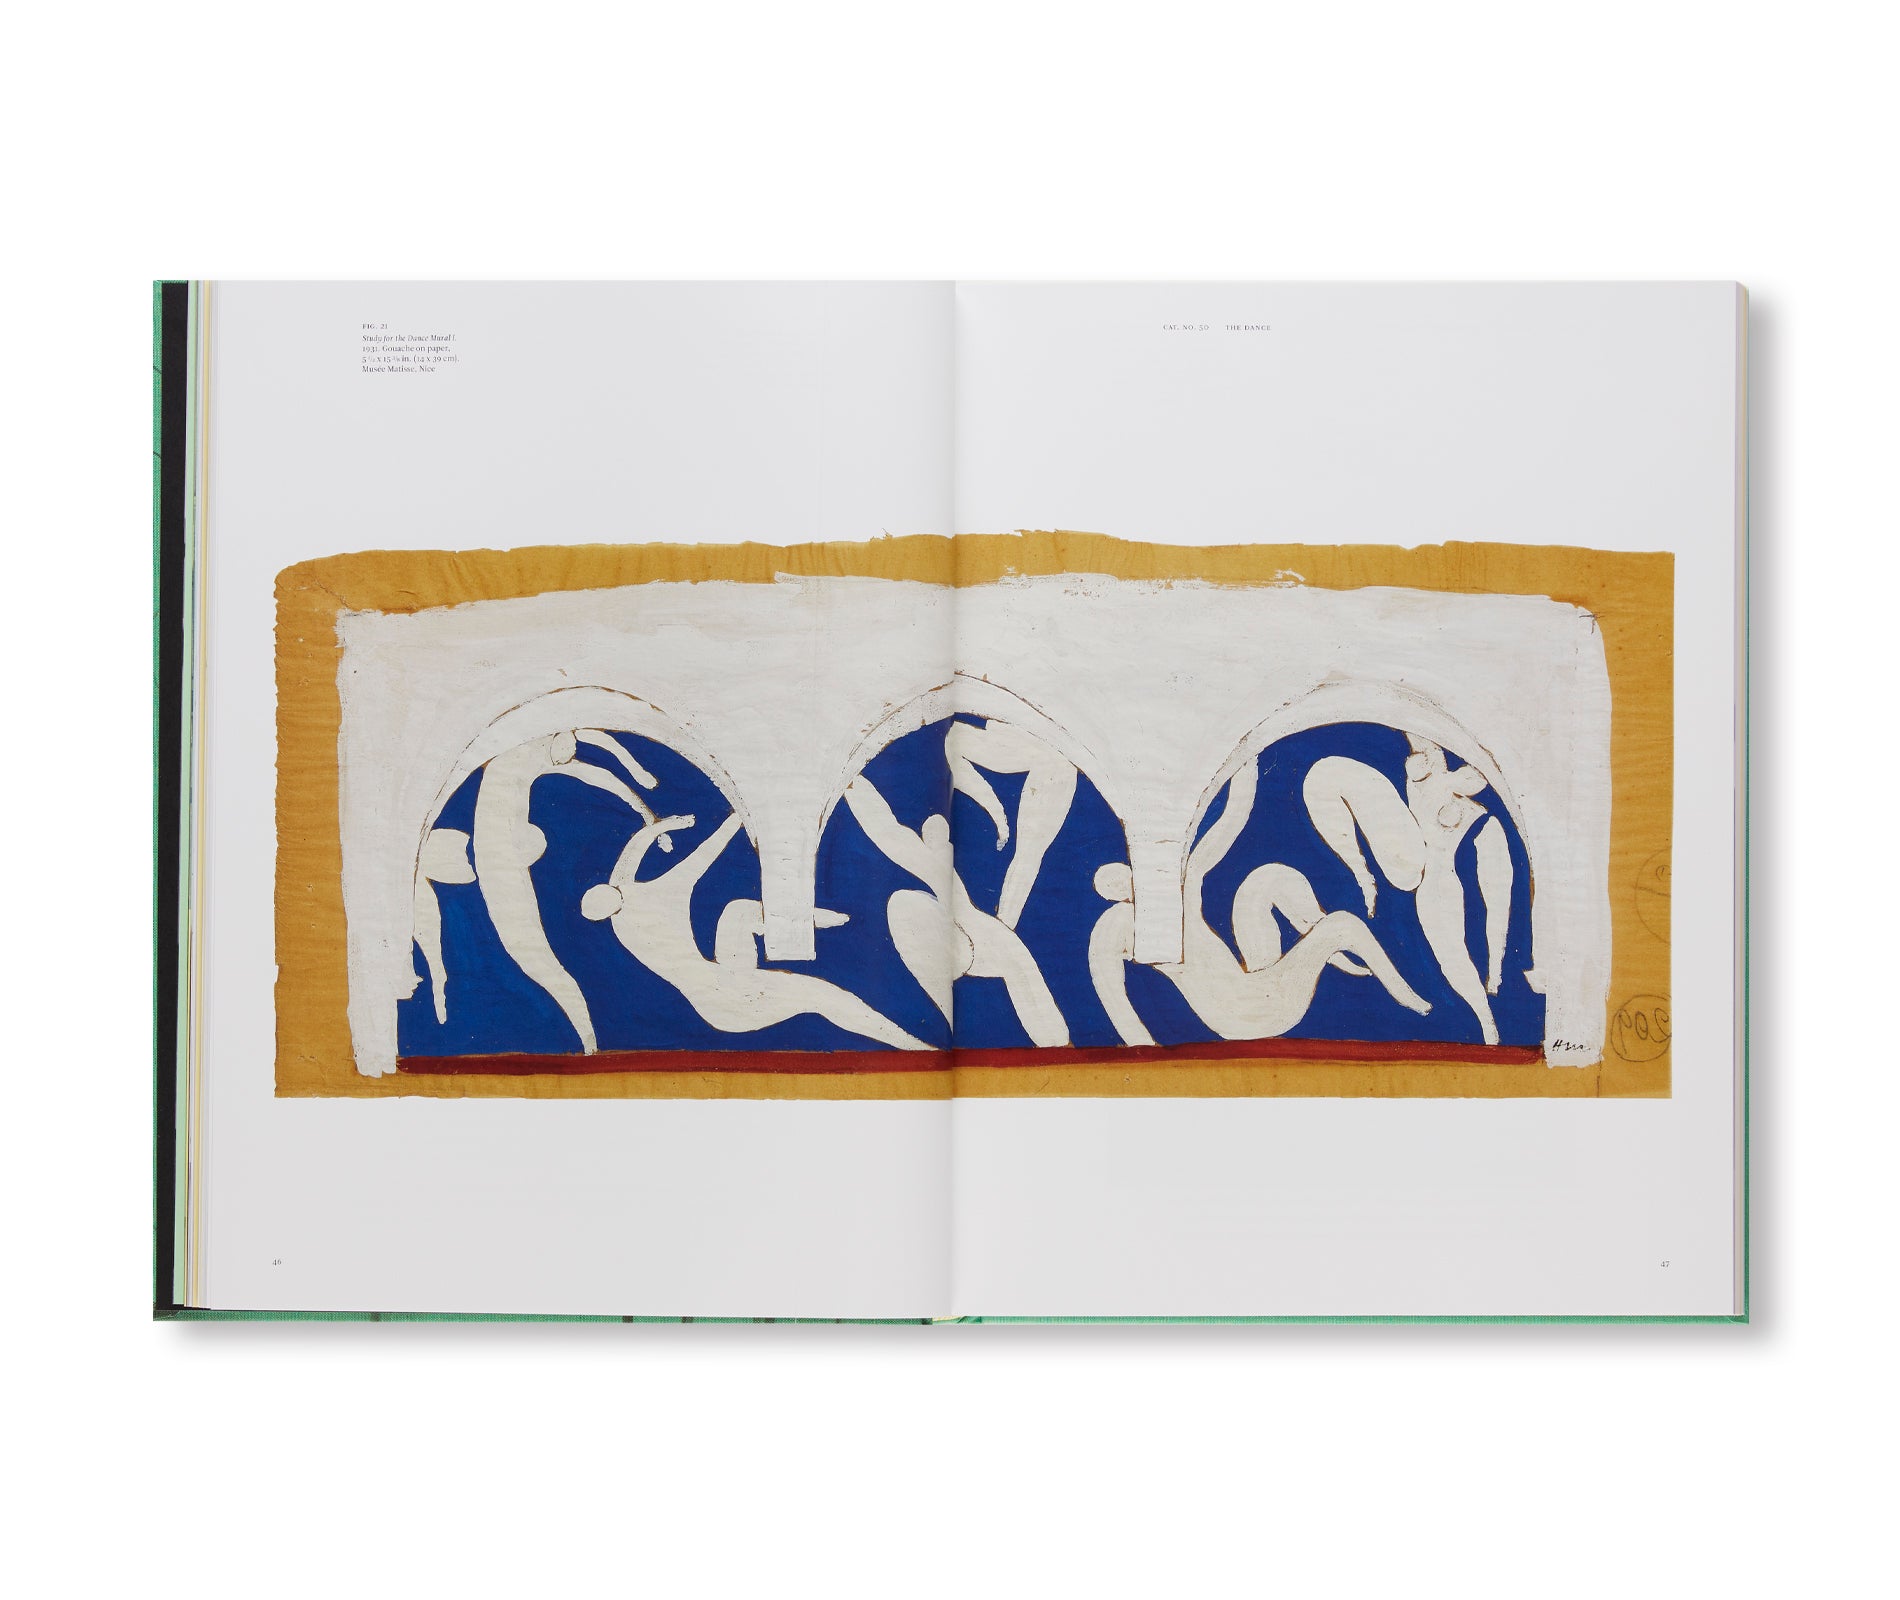 MATISSE IN THE BARNES FOUNDATION by Henri Matisse